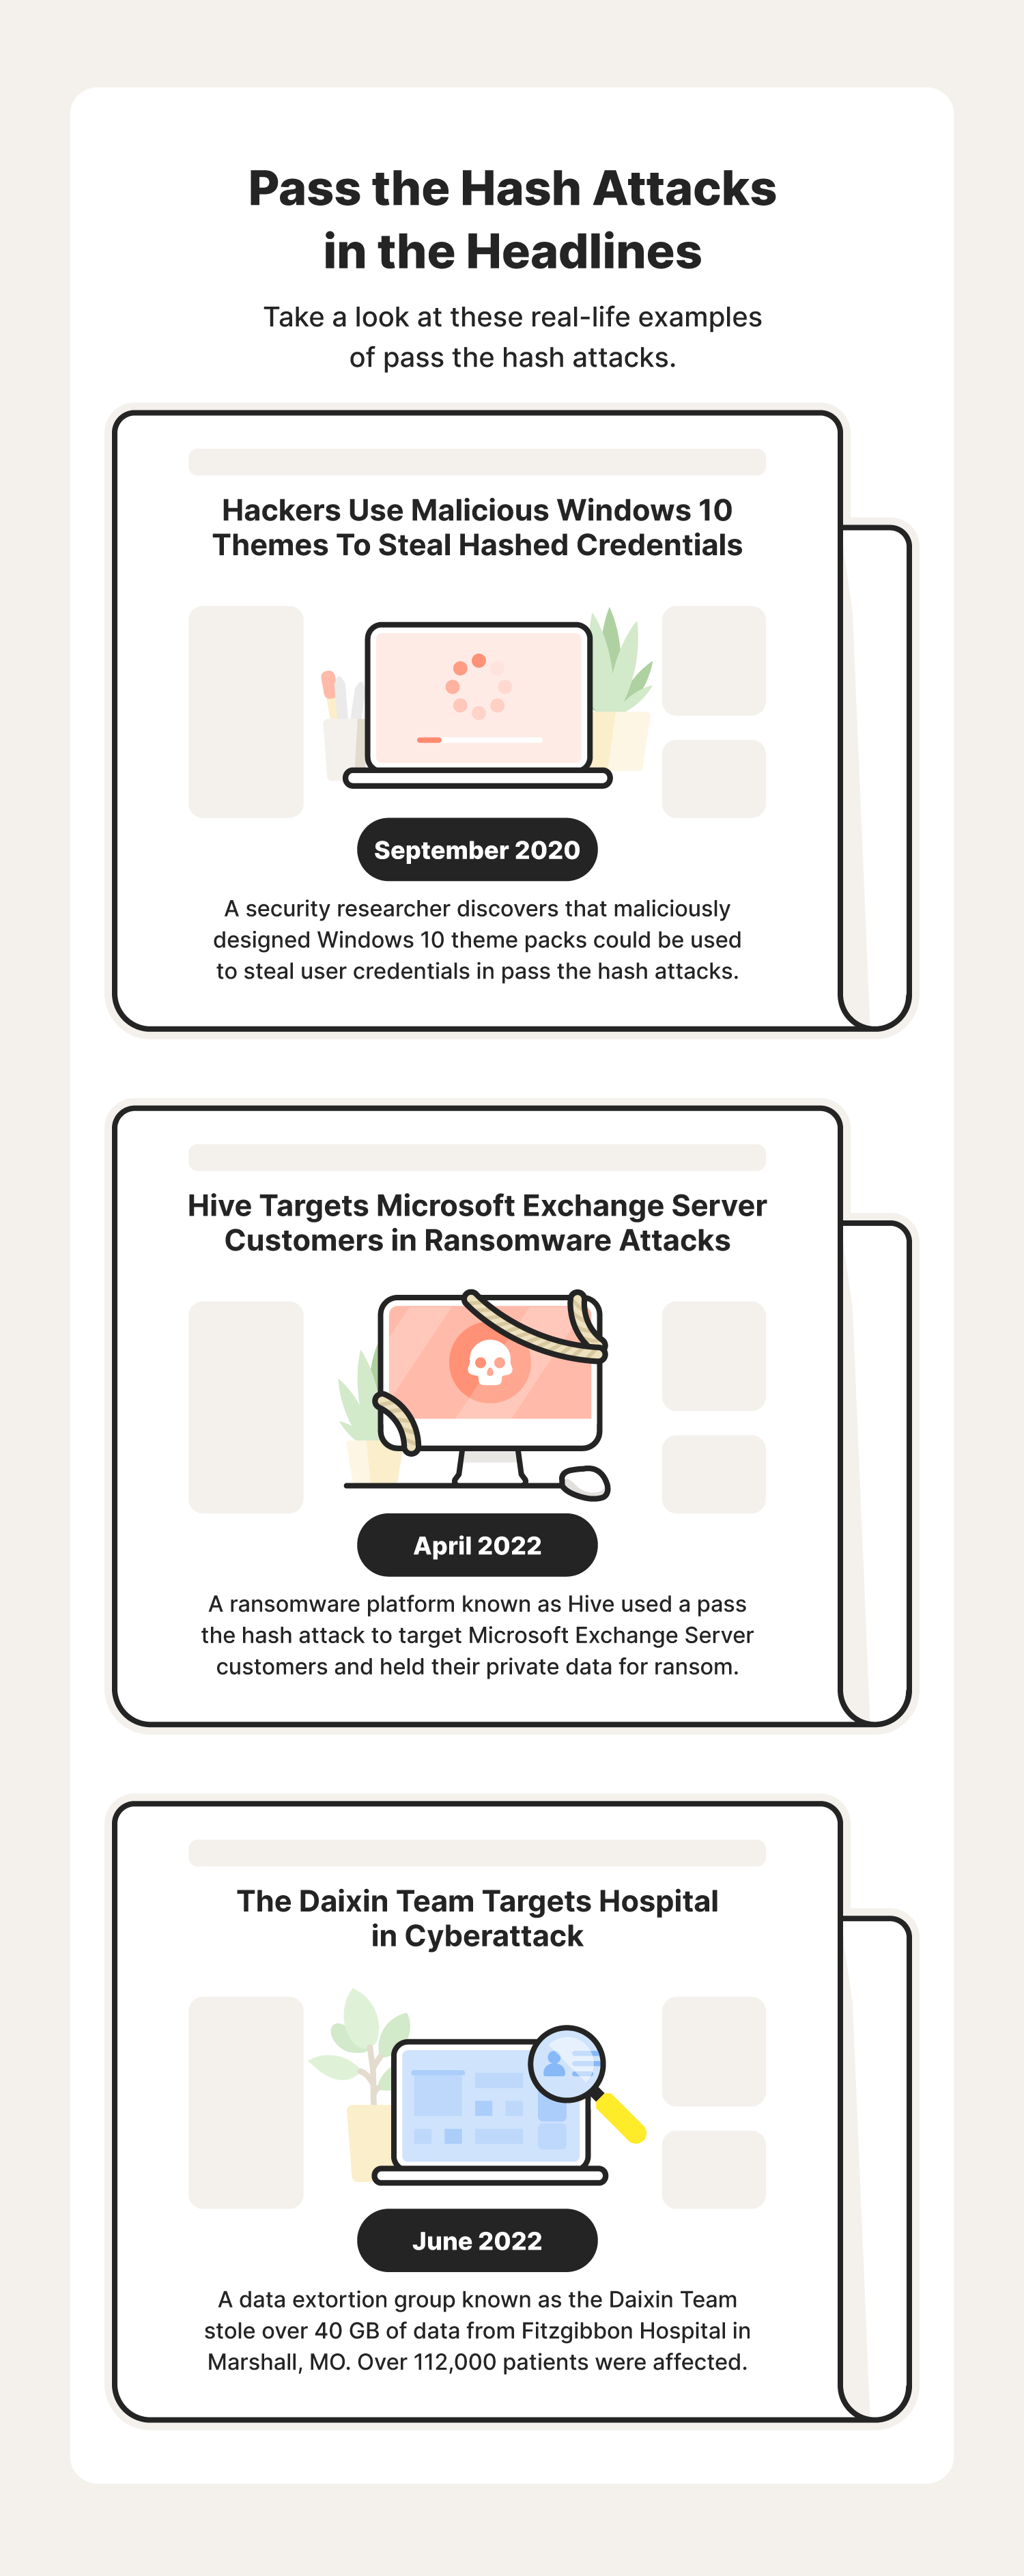 A graphic showcases different real-life examples of pass the hash attacks.